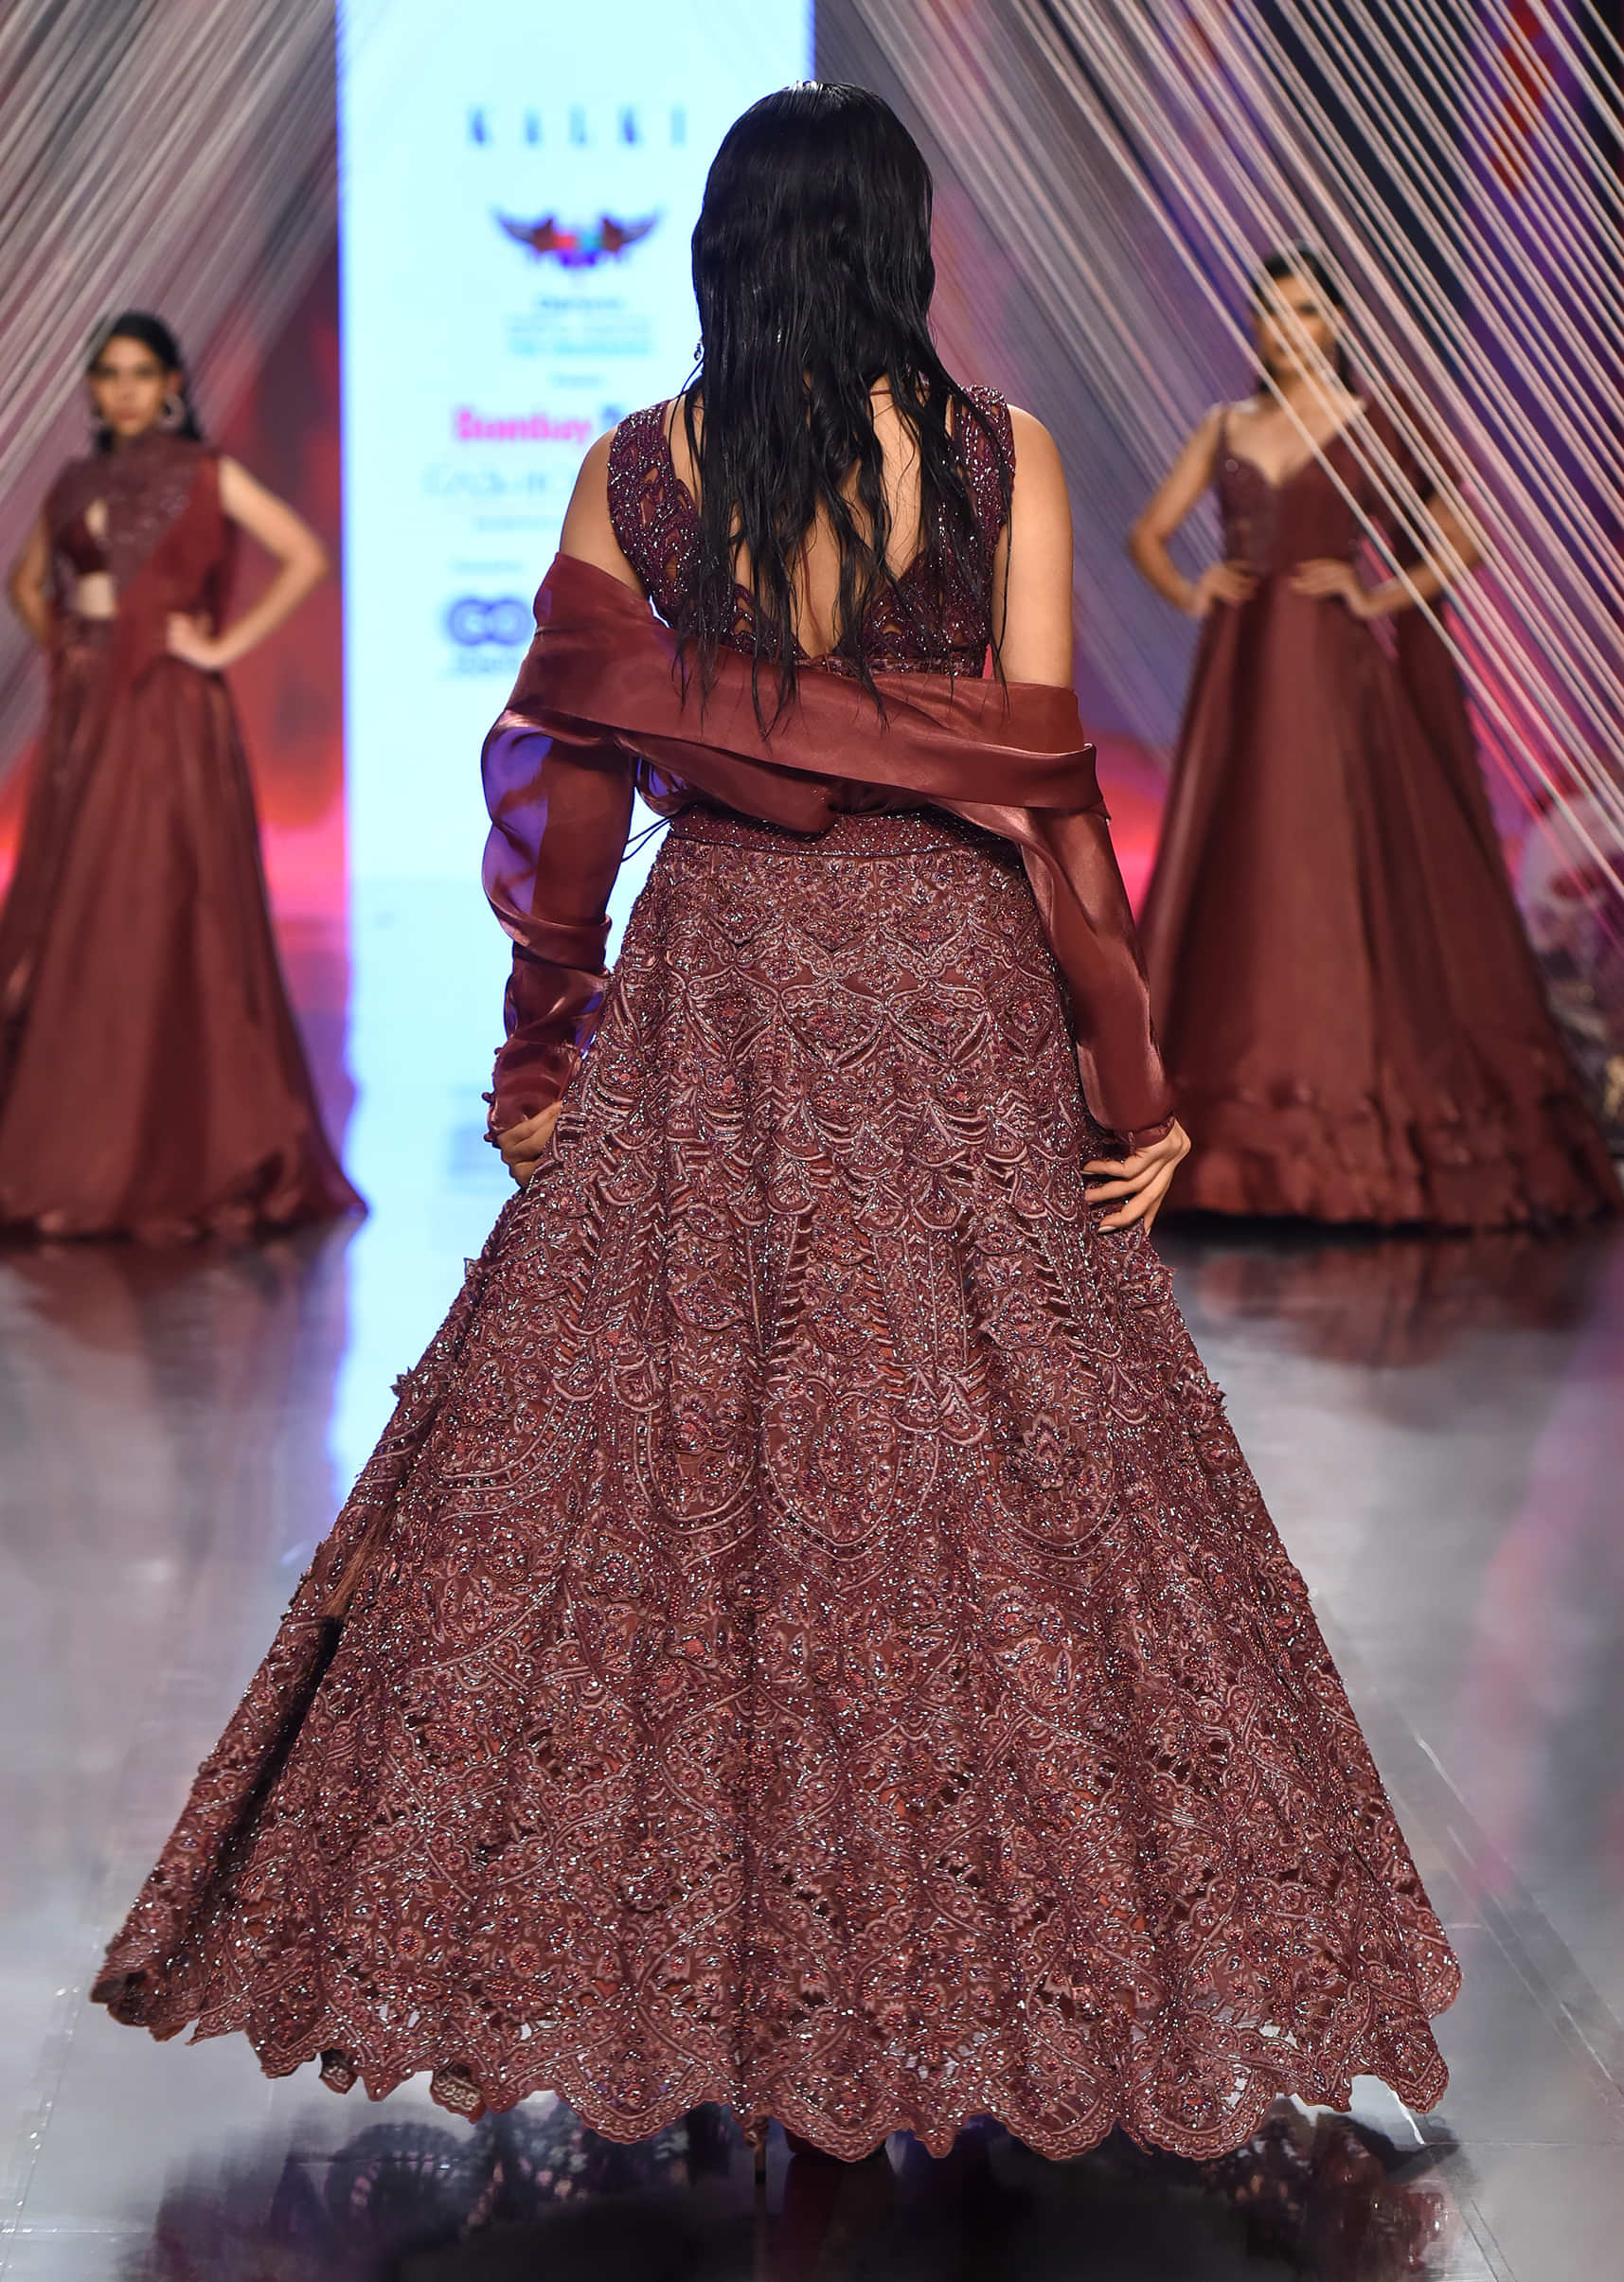 Cherry Crop Top And Lehenga Set In Sequins Embroidery, Crop Top Comes In Sleeveless With A Sweetheart Neckline